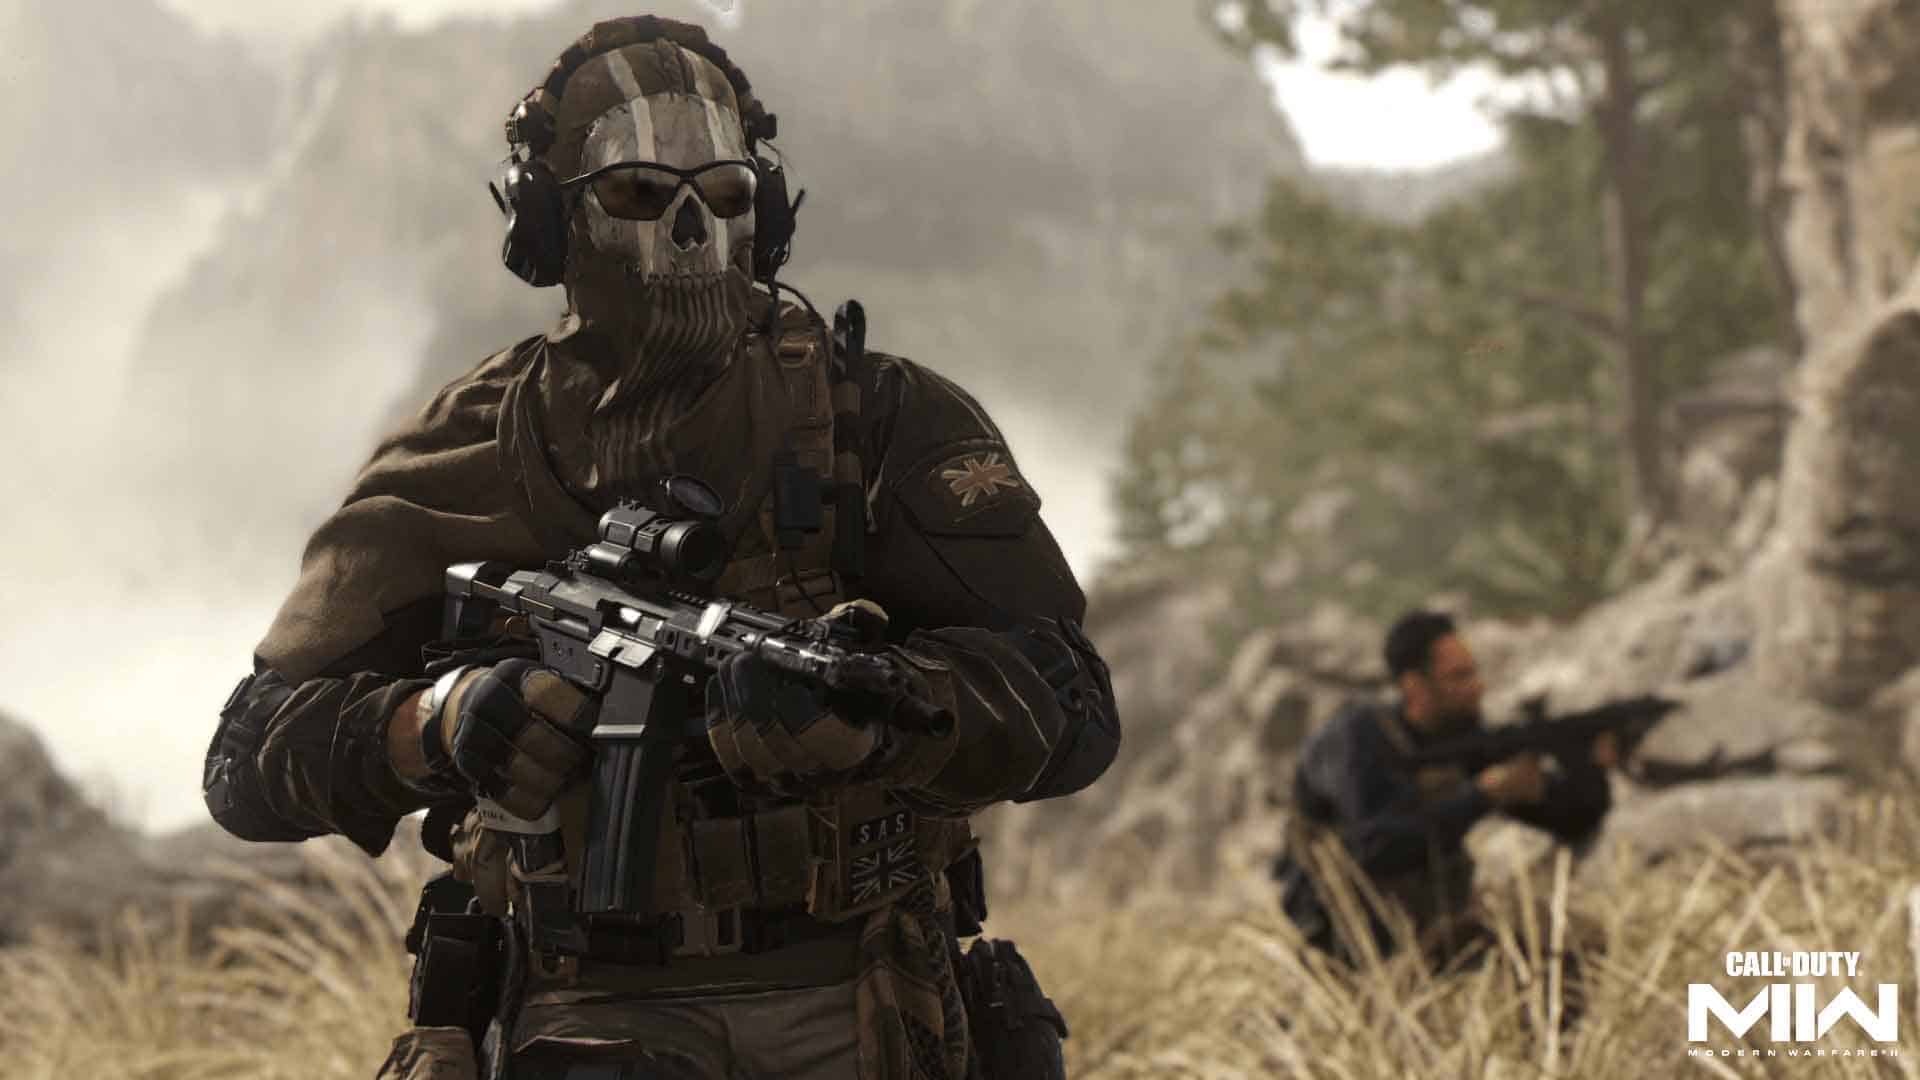 PlayStation boss says Xbox’s Call of Duty offer was “inadequate on so many levels”